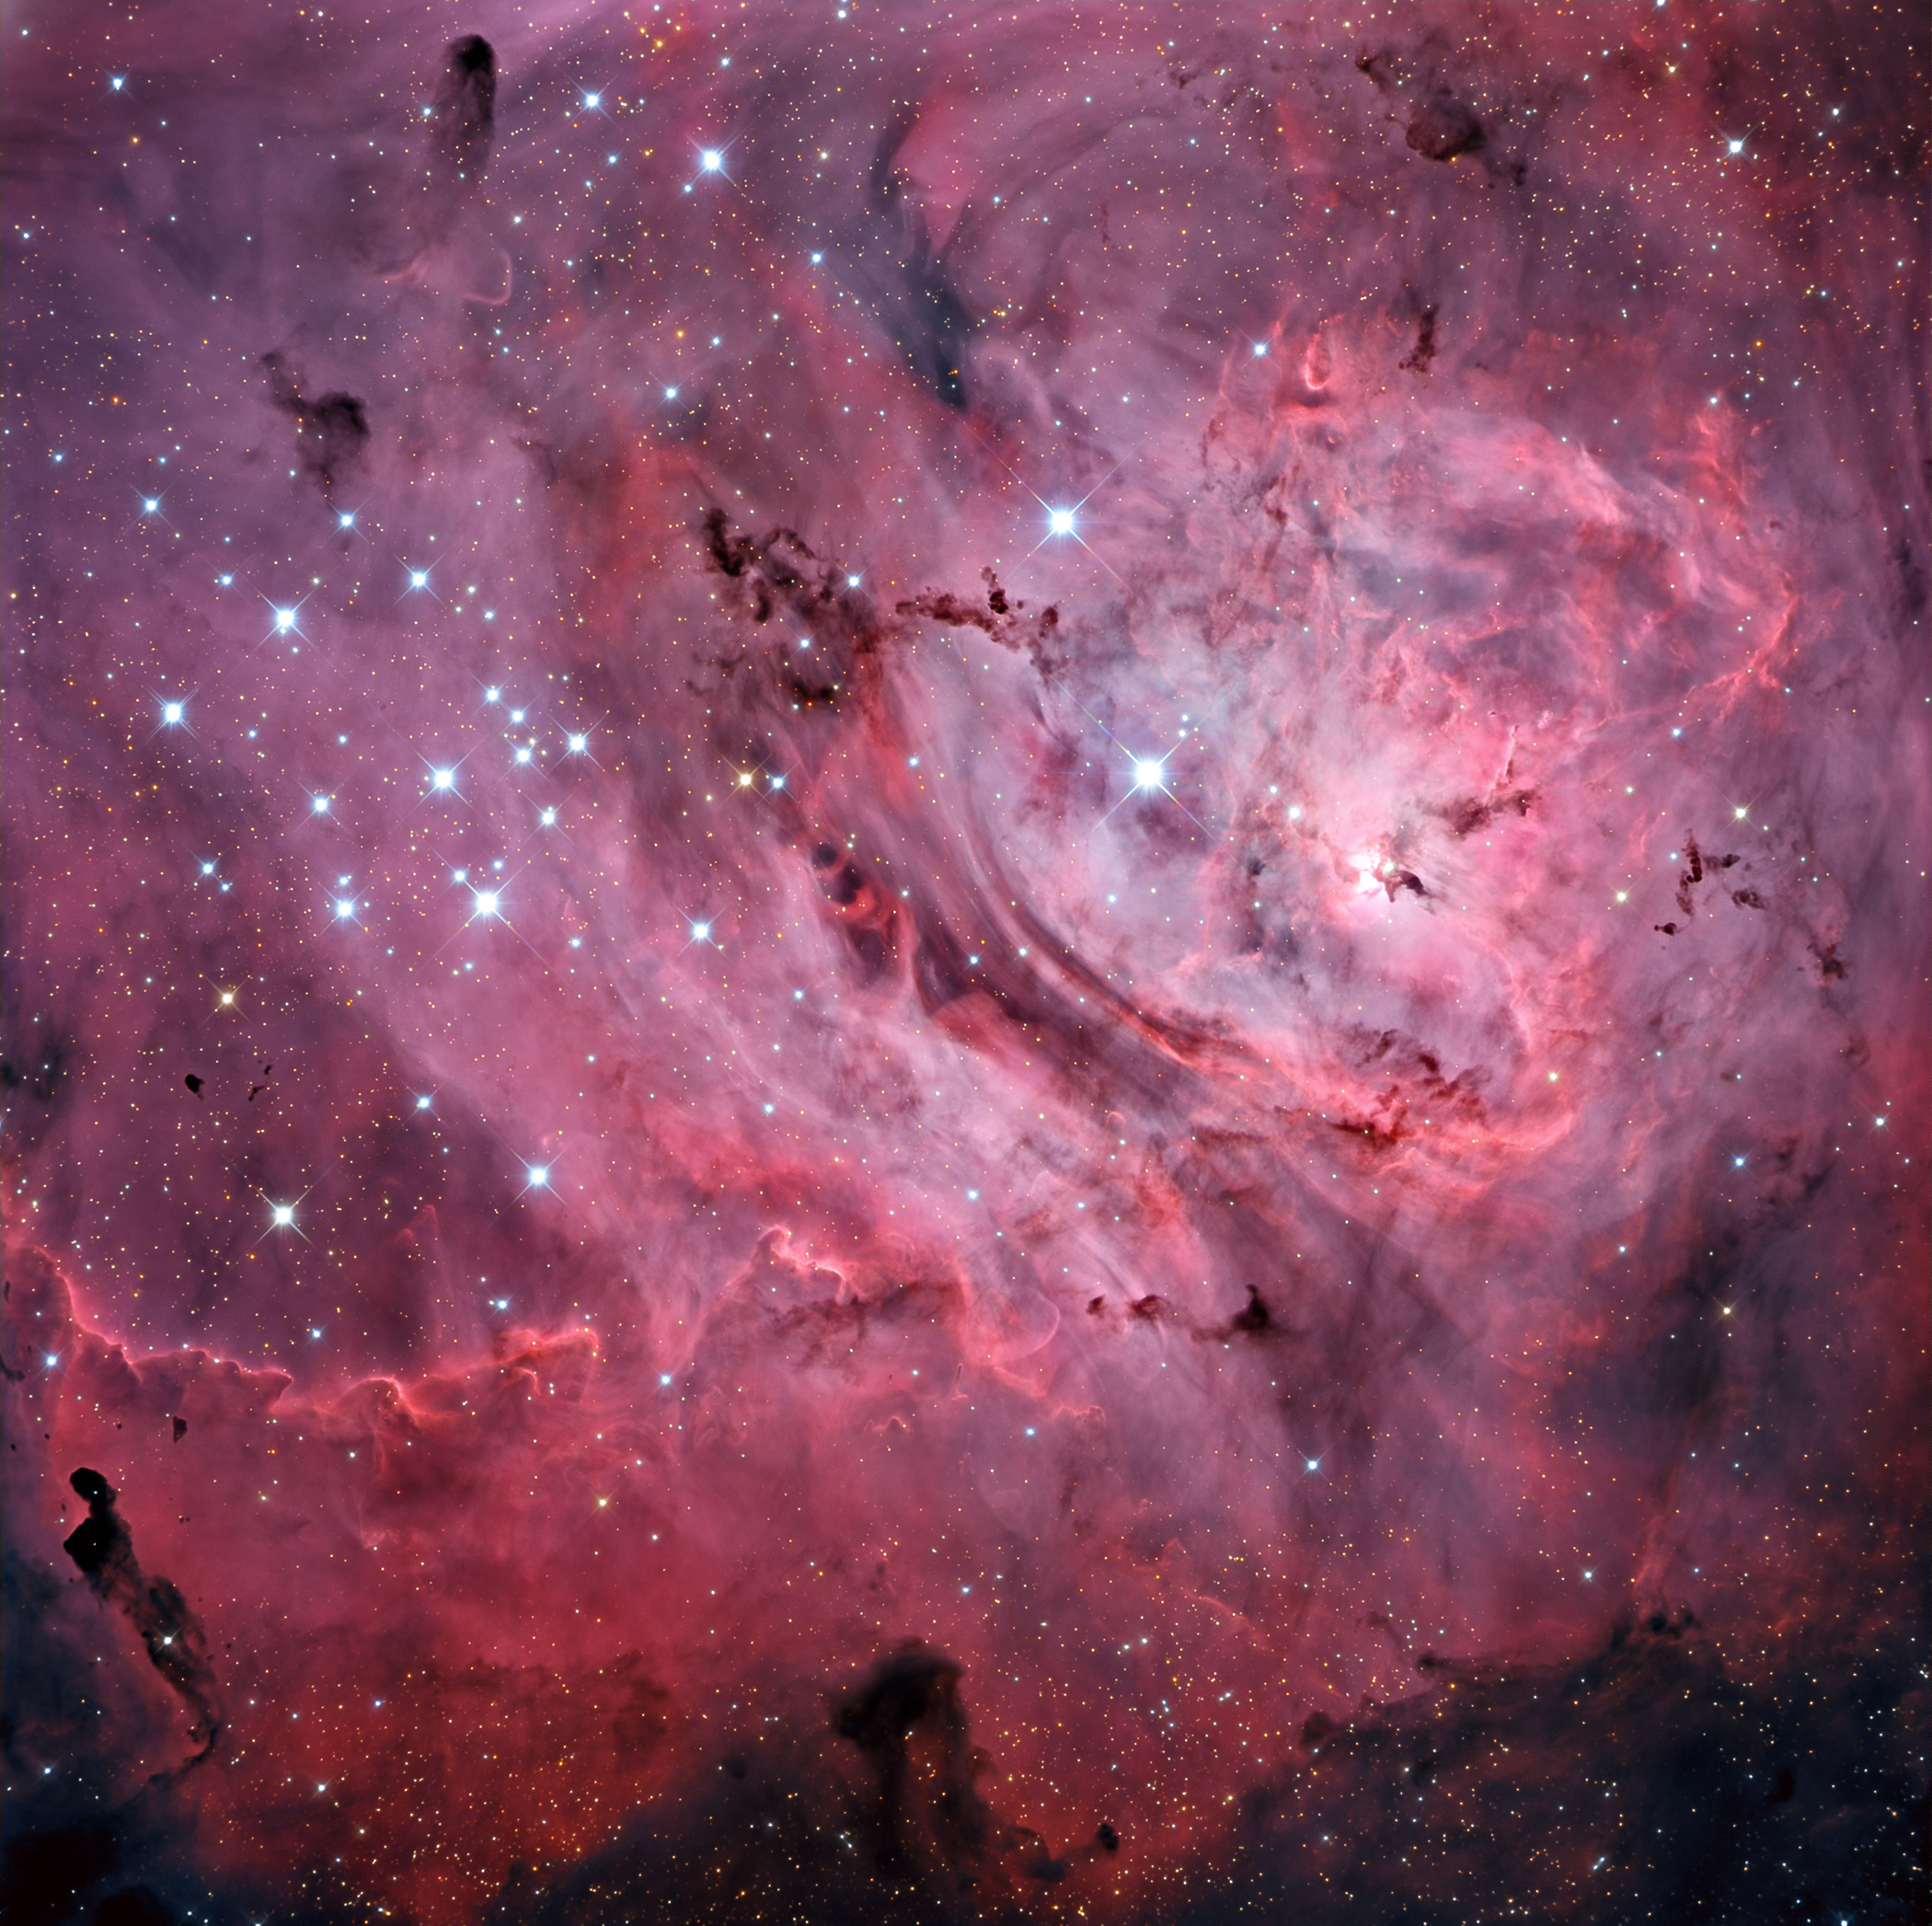 The Lagoon Nebula, a bright cloud of dust and gas 4,000 light years away and 40 light years across, glows brilliantly due to hot energetic young stars forming within. It can even be glimpsed with the unaided eye under dark skies away from city lights. The photo was captured at the Mount Lemmon SkyCenter in Arizona and released on July 15, 2015.